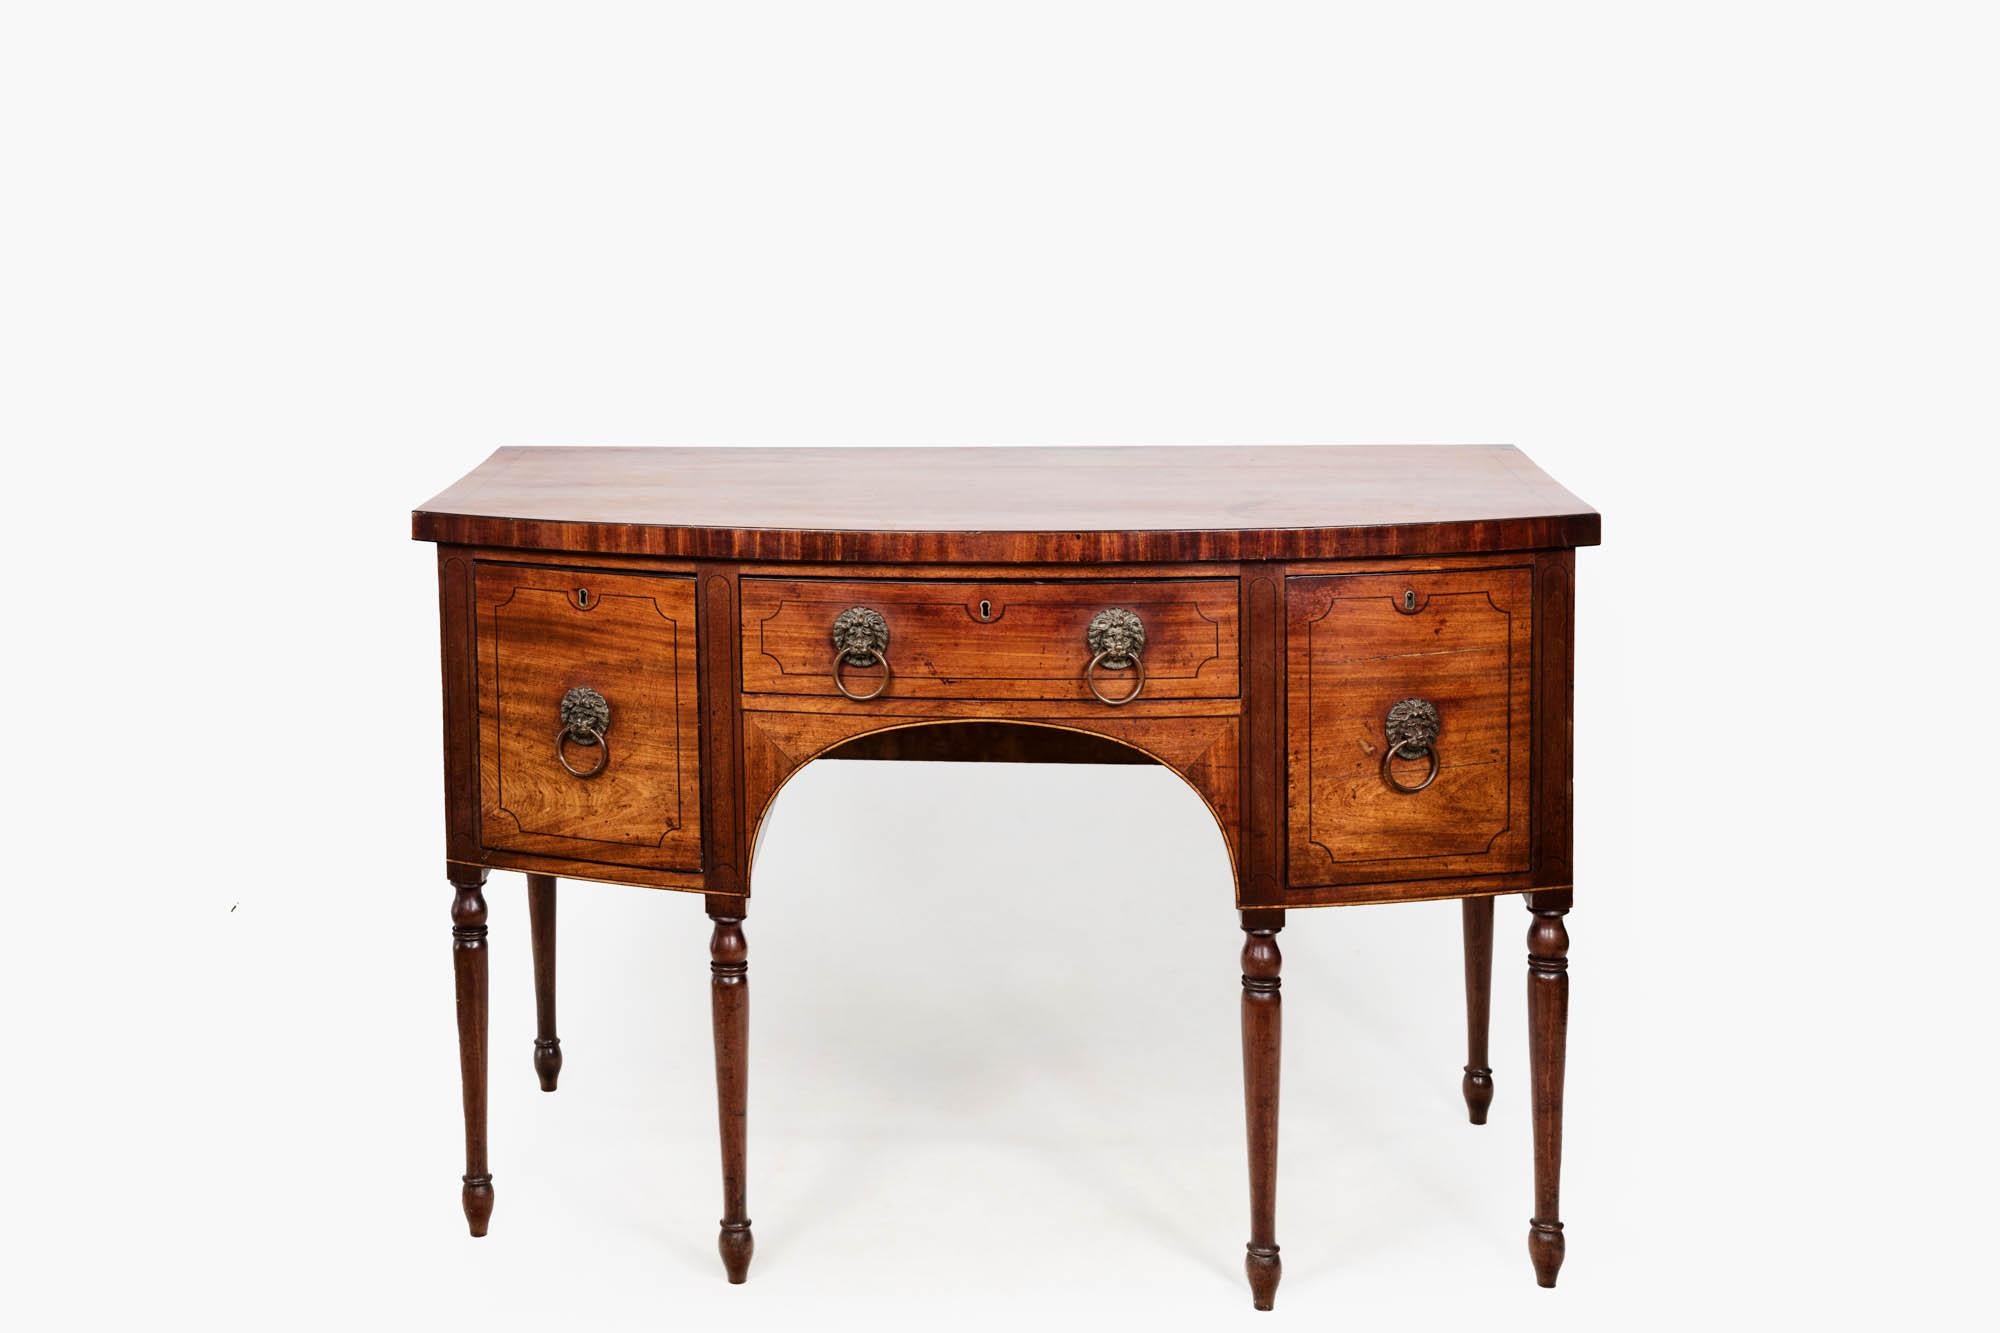 Early 19th century Regency bow-fronted mahogany side table with delicate inlay detailing. Featuring one central drawer, flanked by a cellaret drawer to the left and cupboard to the right. All three fronts have decorative fine inlaid banding and are